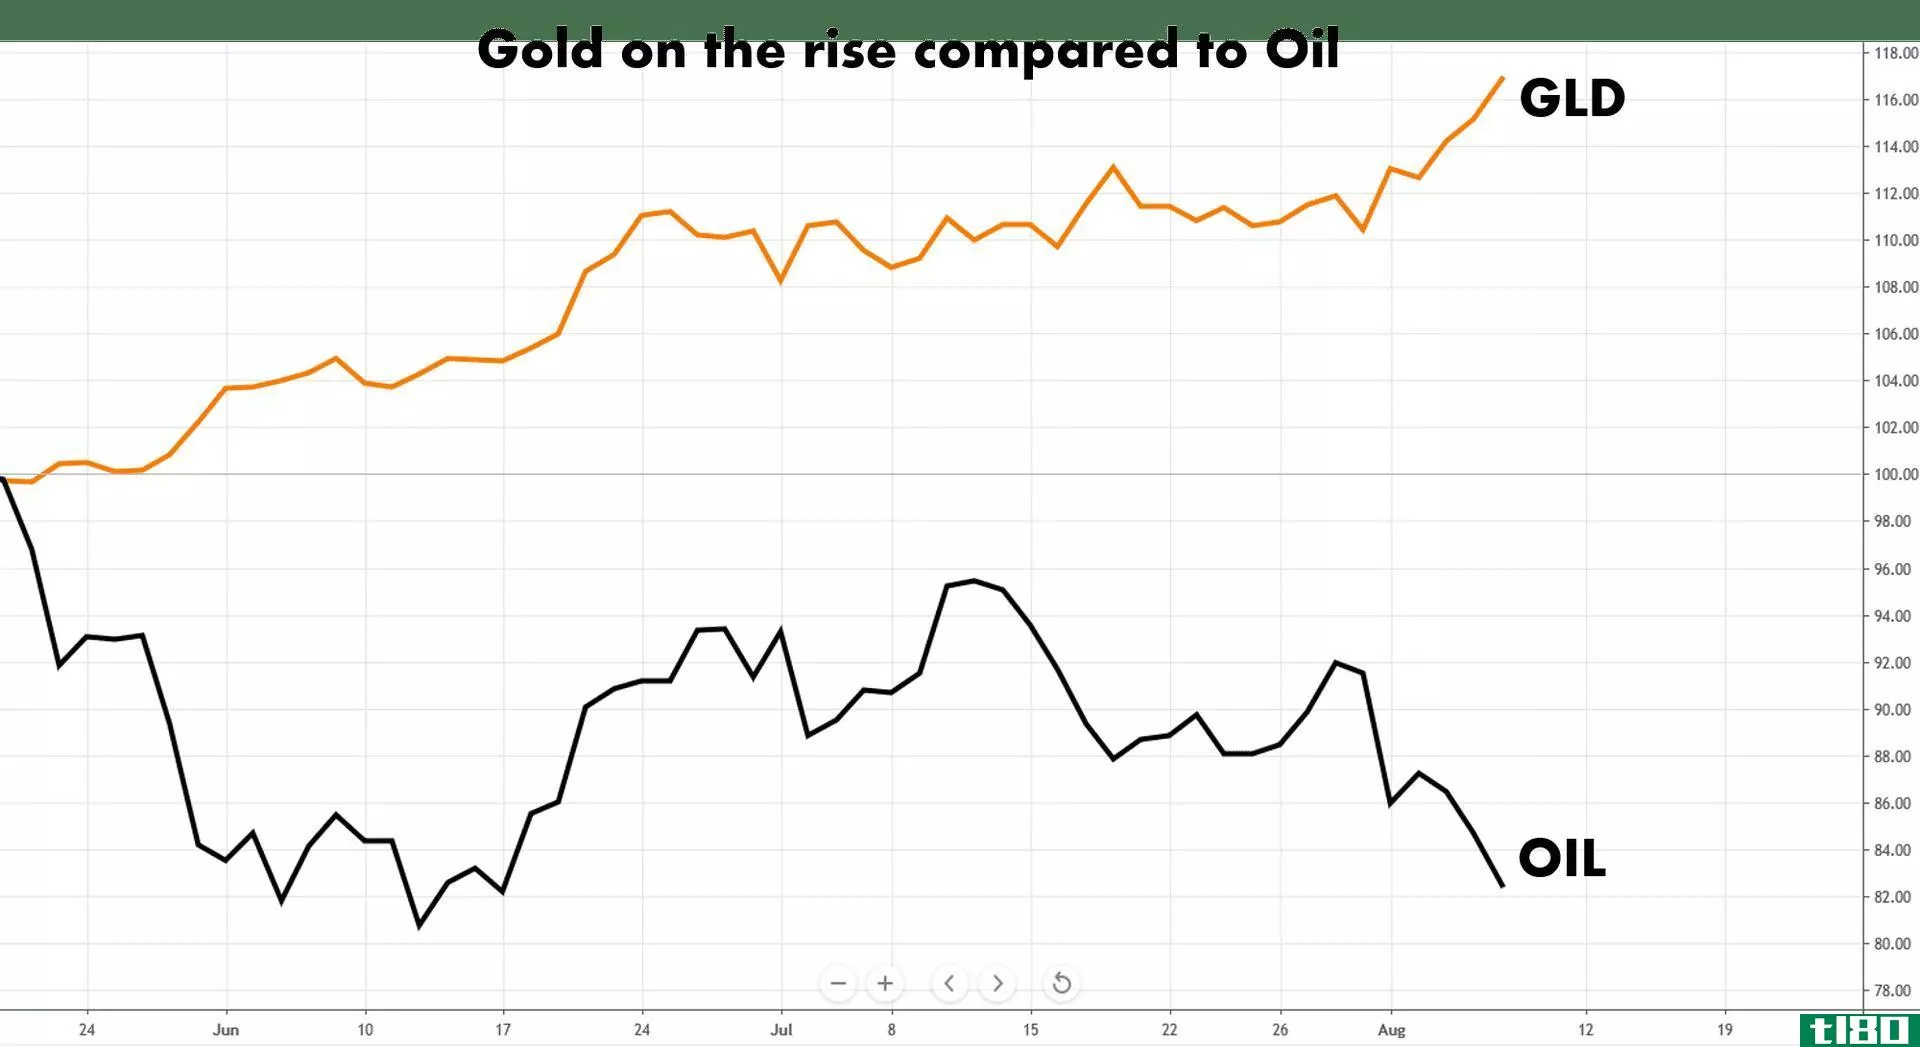 Chart showing gold on the rise and oil declining